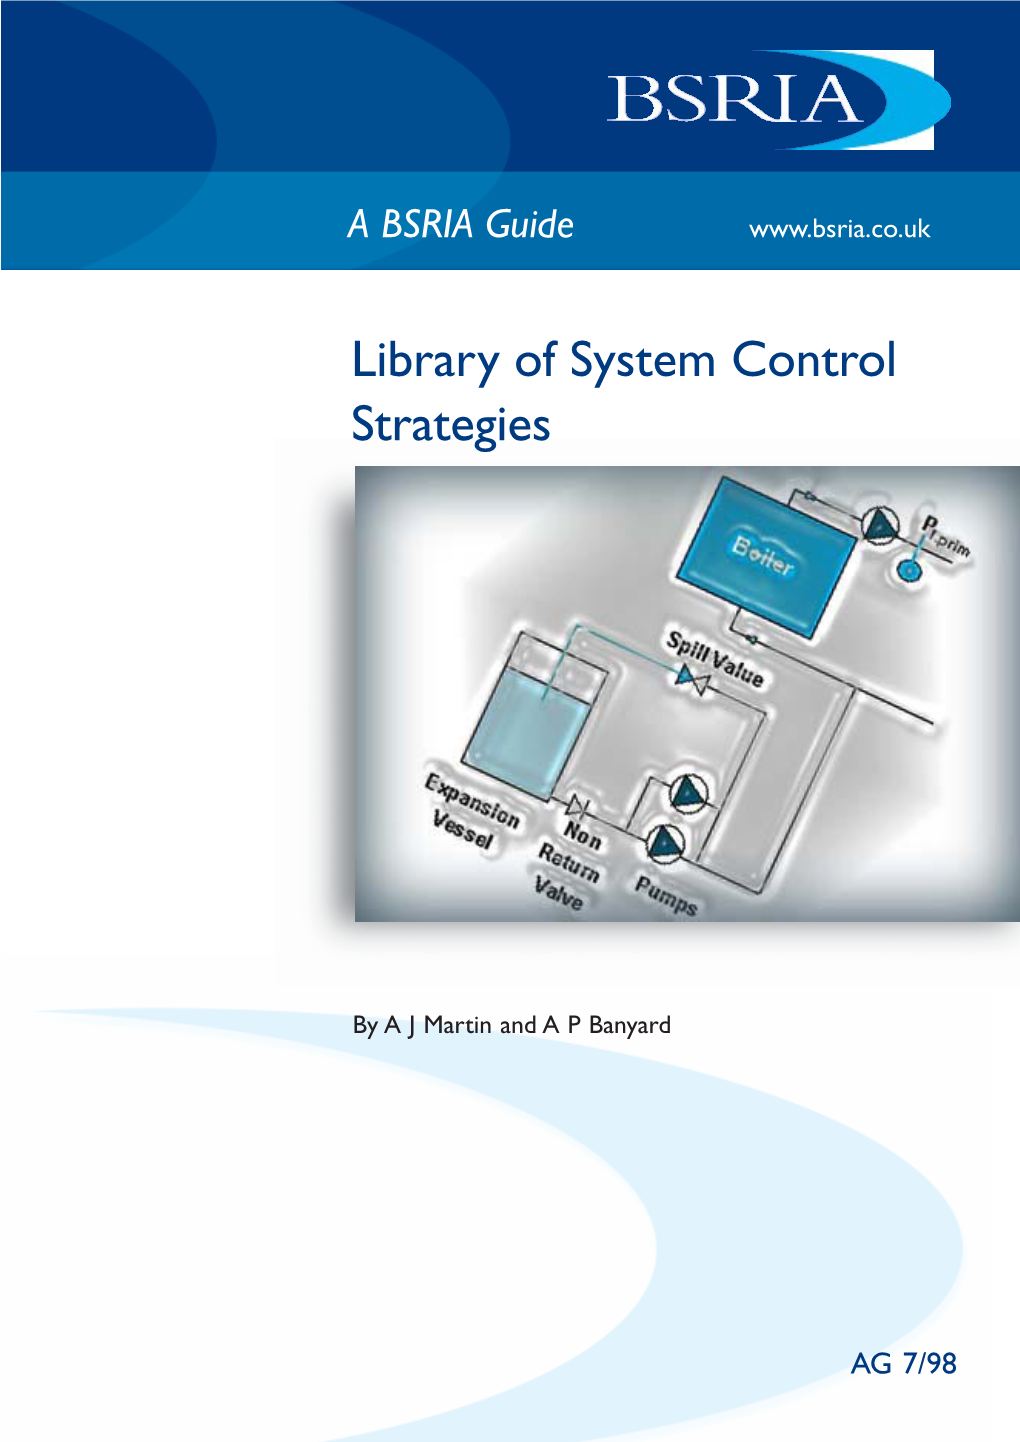 Library of System Control Strategies